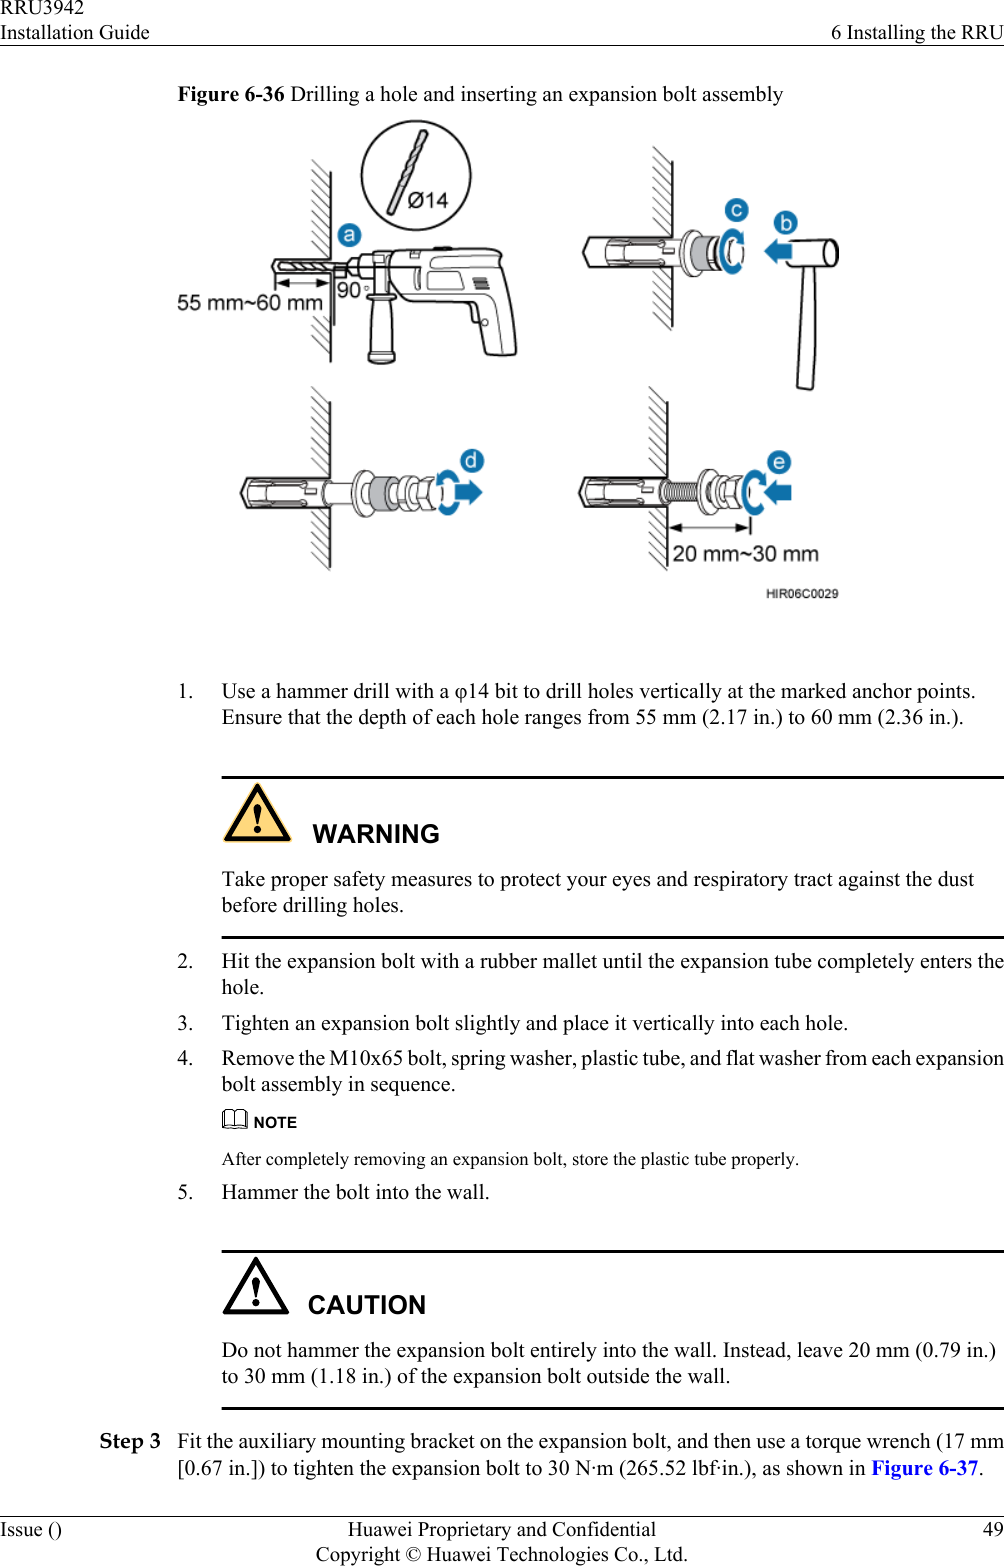 Figure 6-36 Drilling a hole and inserting an expansion bolt assembly 1. Use a hammer drill with a φ14 bit to drill holes vertically at the marked anchor points.Ensure that the depth of each hole ranges from 55 mm (2.17 in.) to 60 mm (2.36 in.).WARNINGTake proper safety measures to protect your eyes and respiratory tract against the dustbefore drilling holes.2. Hit the expansion bolt with a rubber mallet until the expansion tube completely enters thehole.3. Tighten an expansion bolt slightly and place it vertically into each hole.4. Remove the M10x65 bolt, spring washer, plastic tube, and flat washer from each expansionbolt assembly in sequence.NOTEAfter completely removing an expansion bolt, store the plastic tube properly.5. Hammer the bolt into the wall.CAUTIONDo not hammer the expansion bolt entirely into the wall. Instead, leave 20 mm (0.79 in.)to 30 mm (1.18 in.) of the expansion bolt outside the wall.Step 3 Fit the auxiliary mounting bracket on the expansion bolt, and then use a torque wrench (17 mm[0.67 in.]) to tighten the expansion bolt to 30 N·m (265.52 lbf·in.), as shown in Figure 6-37.RRU3942Installation Guide 6 Installing the RRUIssue () Huawei Proprietary and ConfidentialCopyright © Huawei Technologies Co., Ltd.49